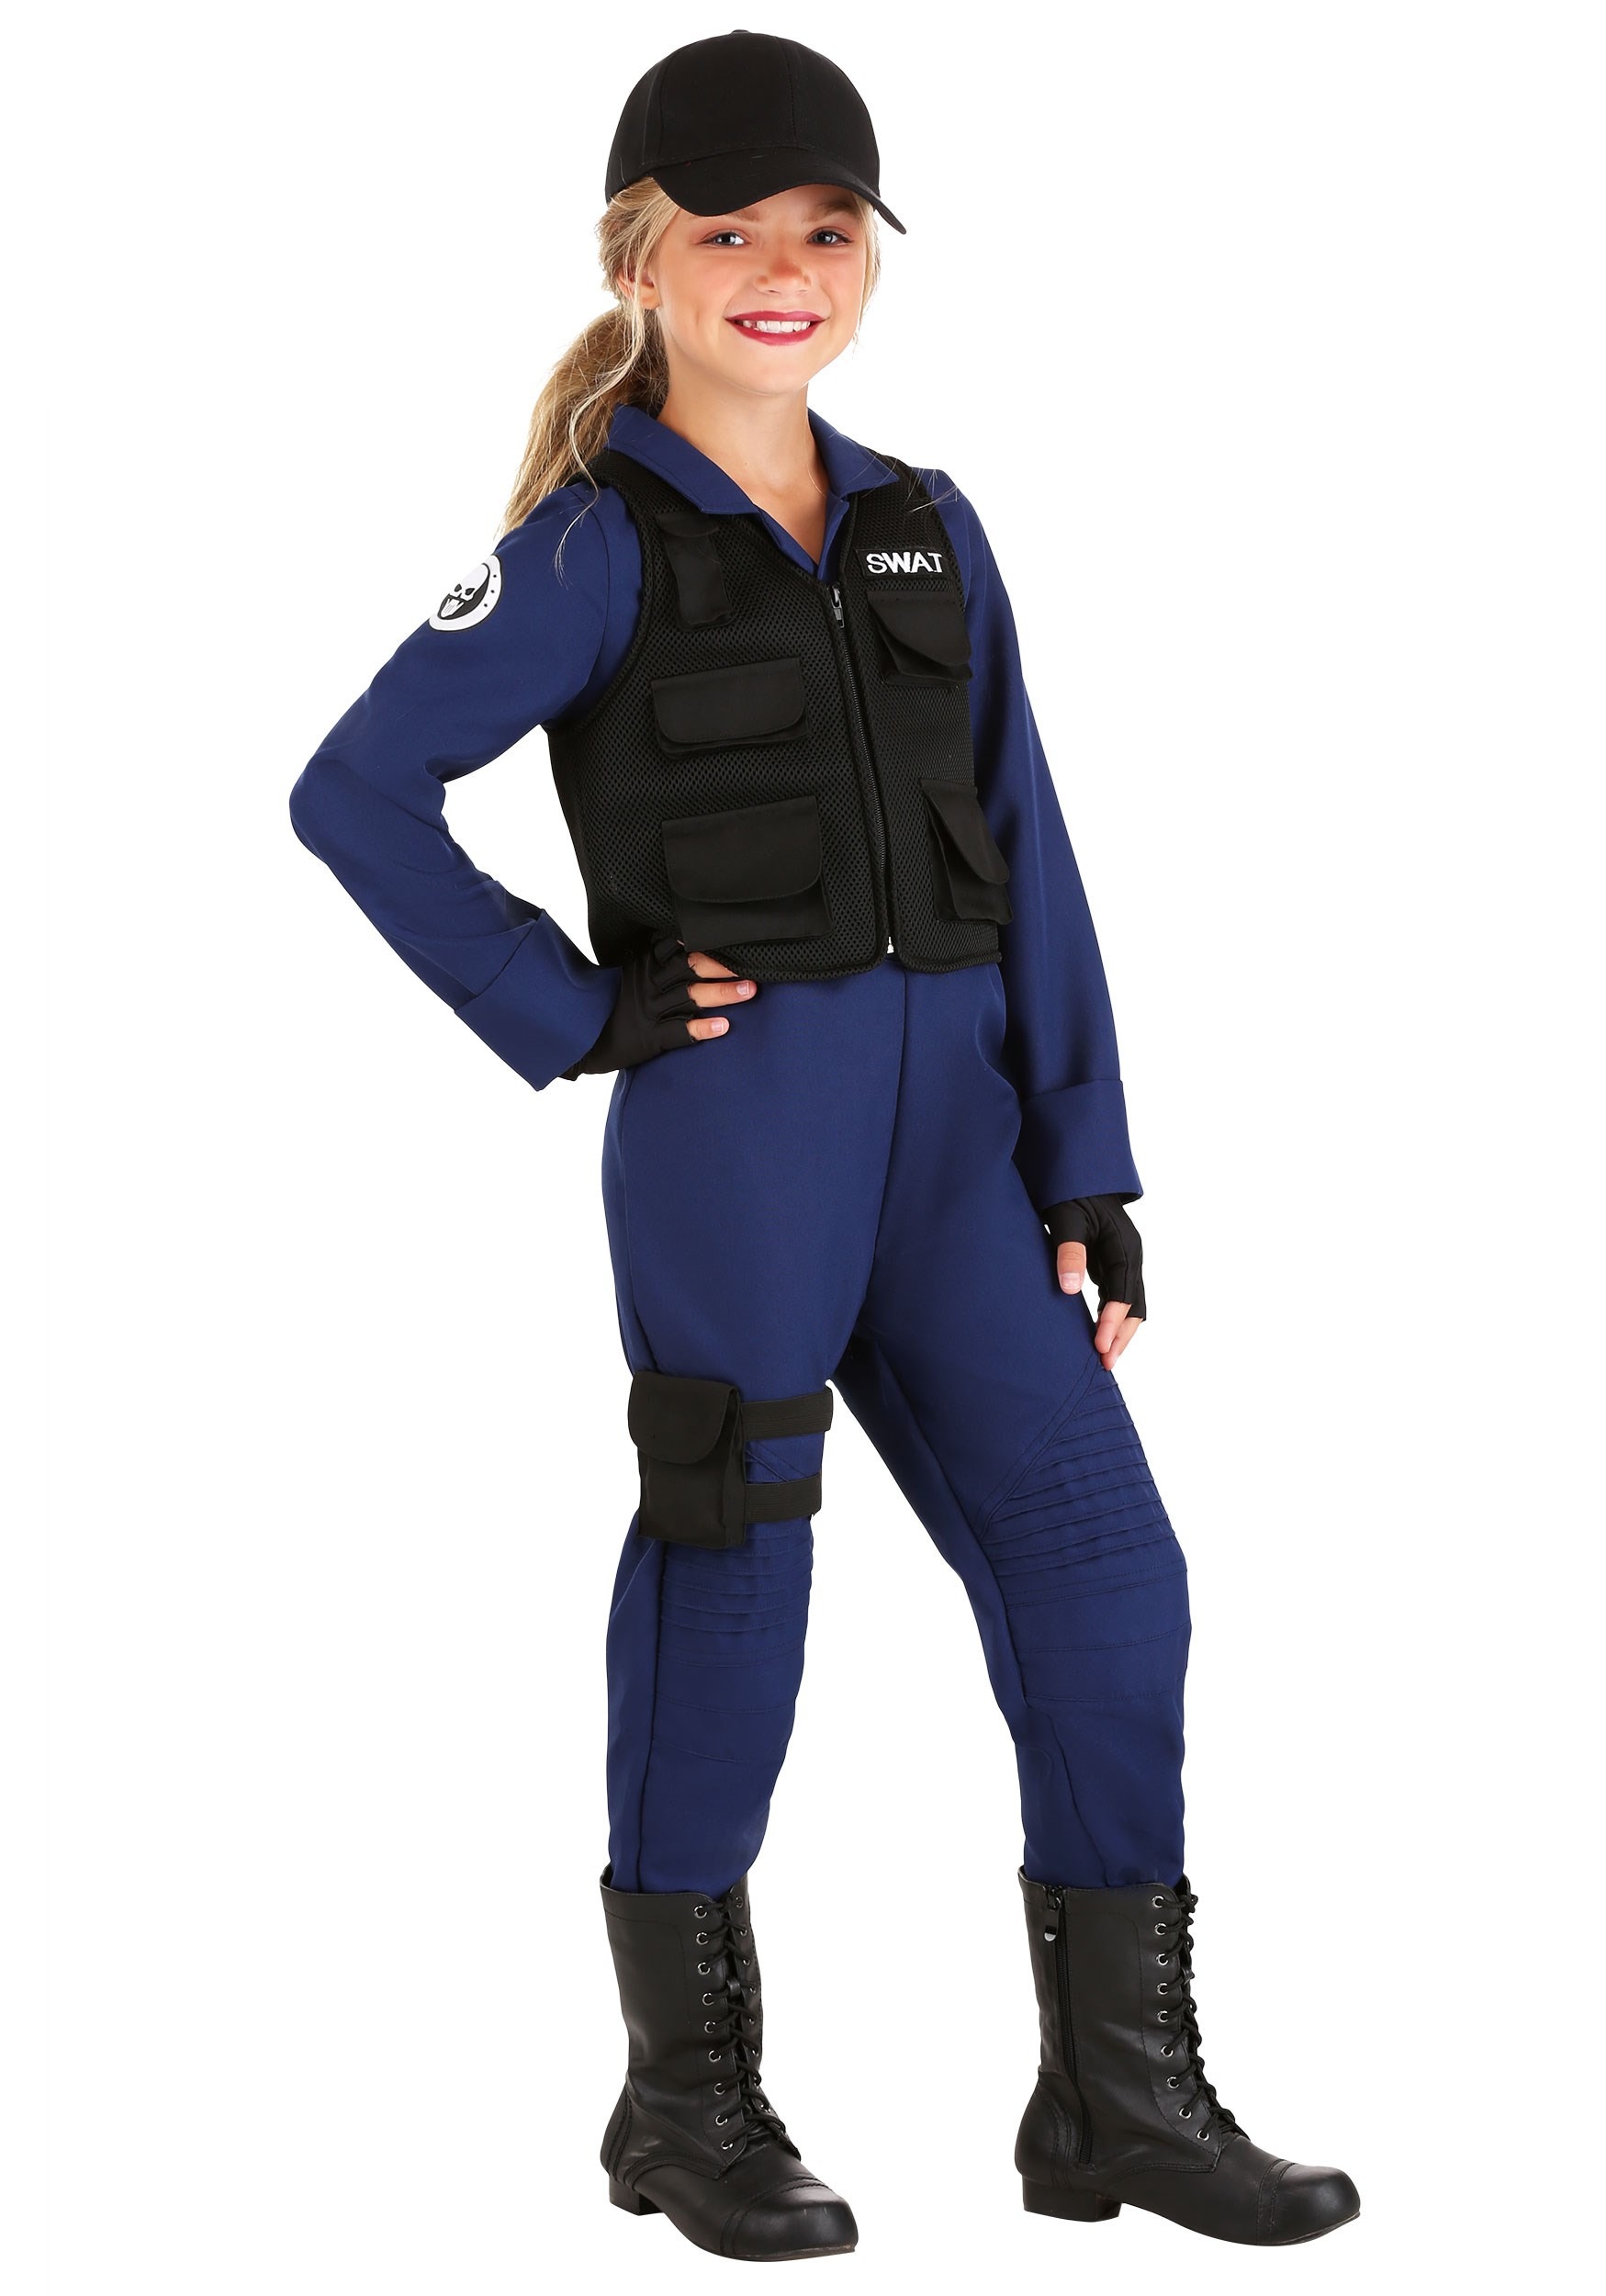 Photos - Fancy Dress Swat FUN Costumes Police  Costume for Girl's Black/Blue FUN0467CH 